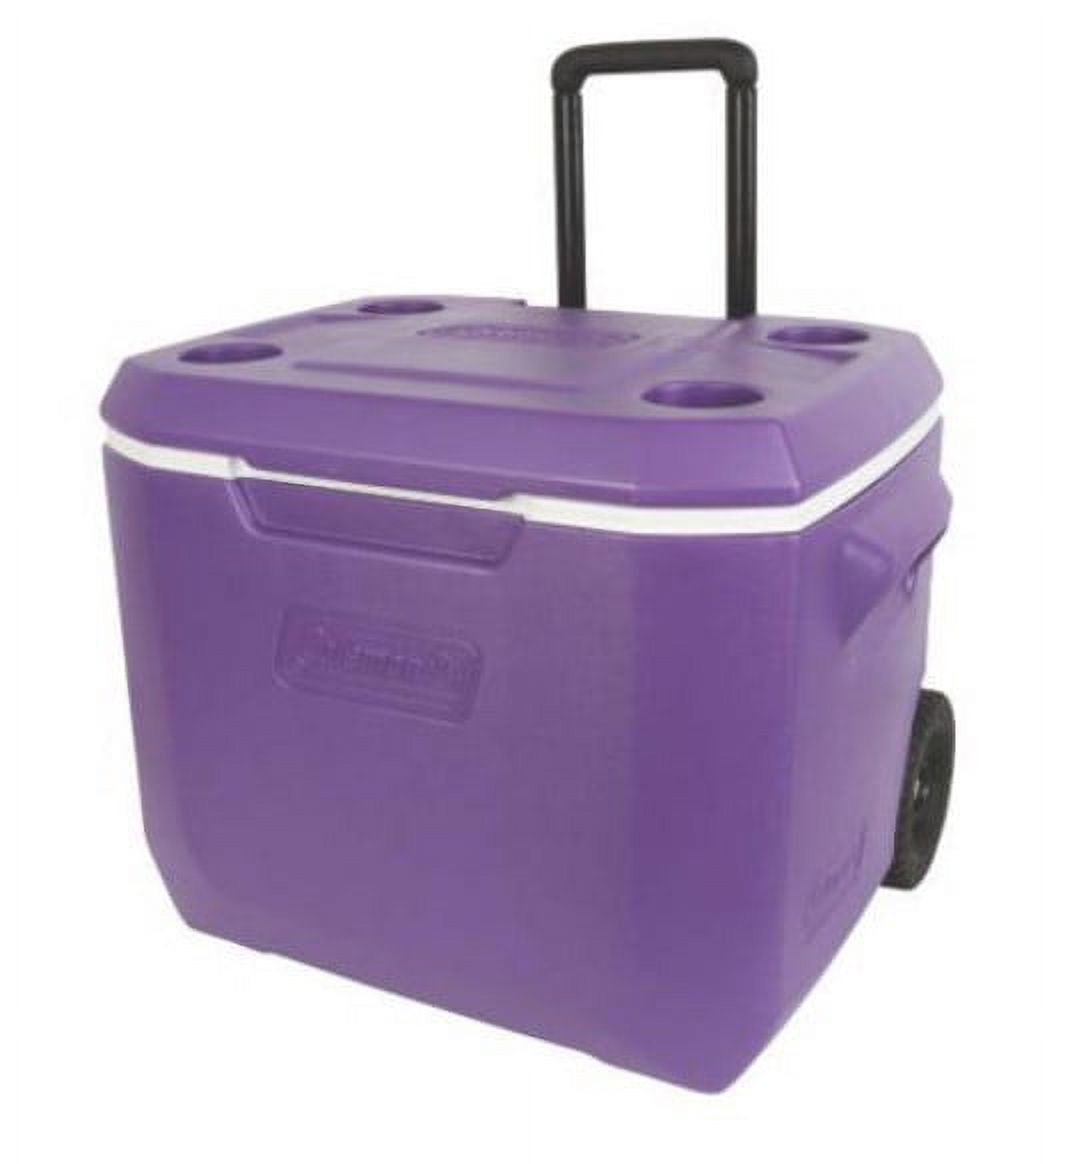 Coleman 50 qt. Xtreme Hard-Sided Rolling Cooler, Purple - image 2 of 5